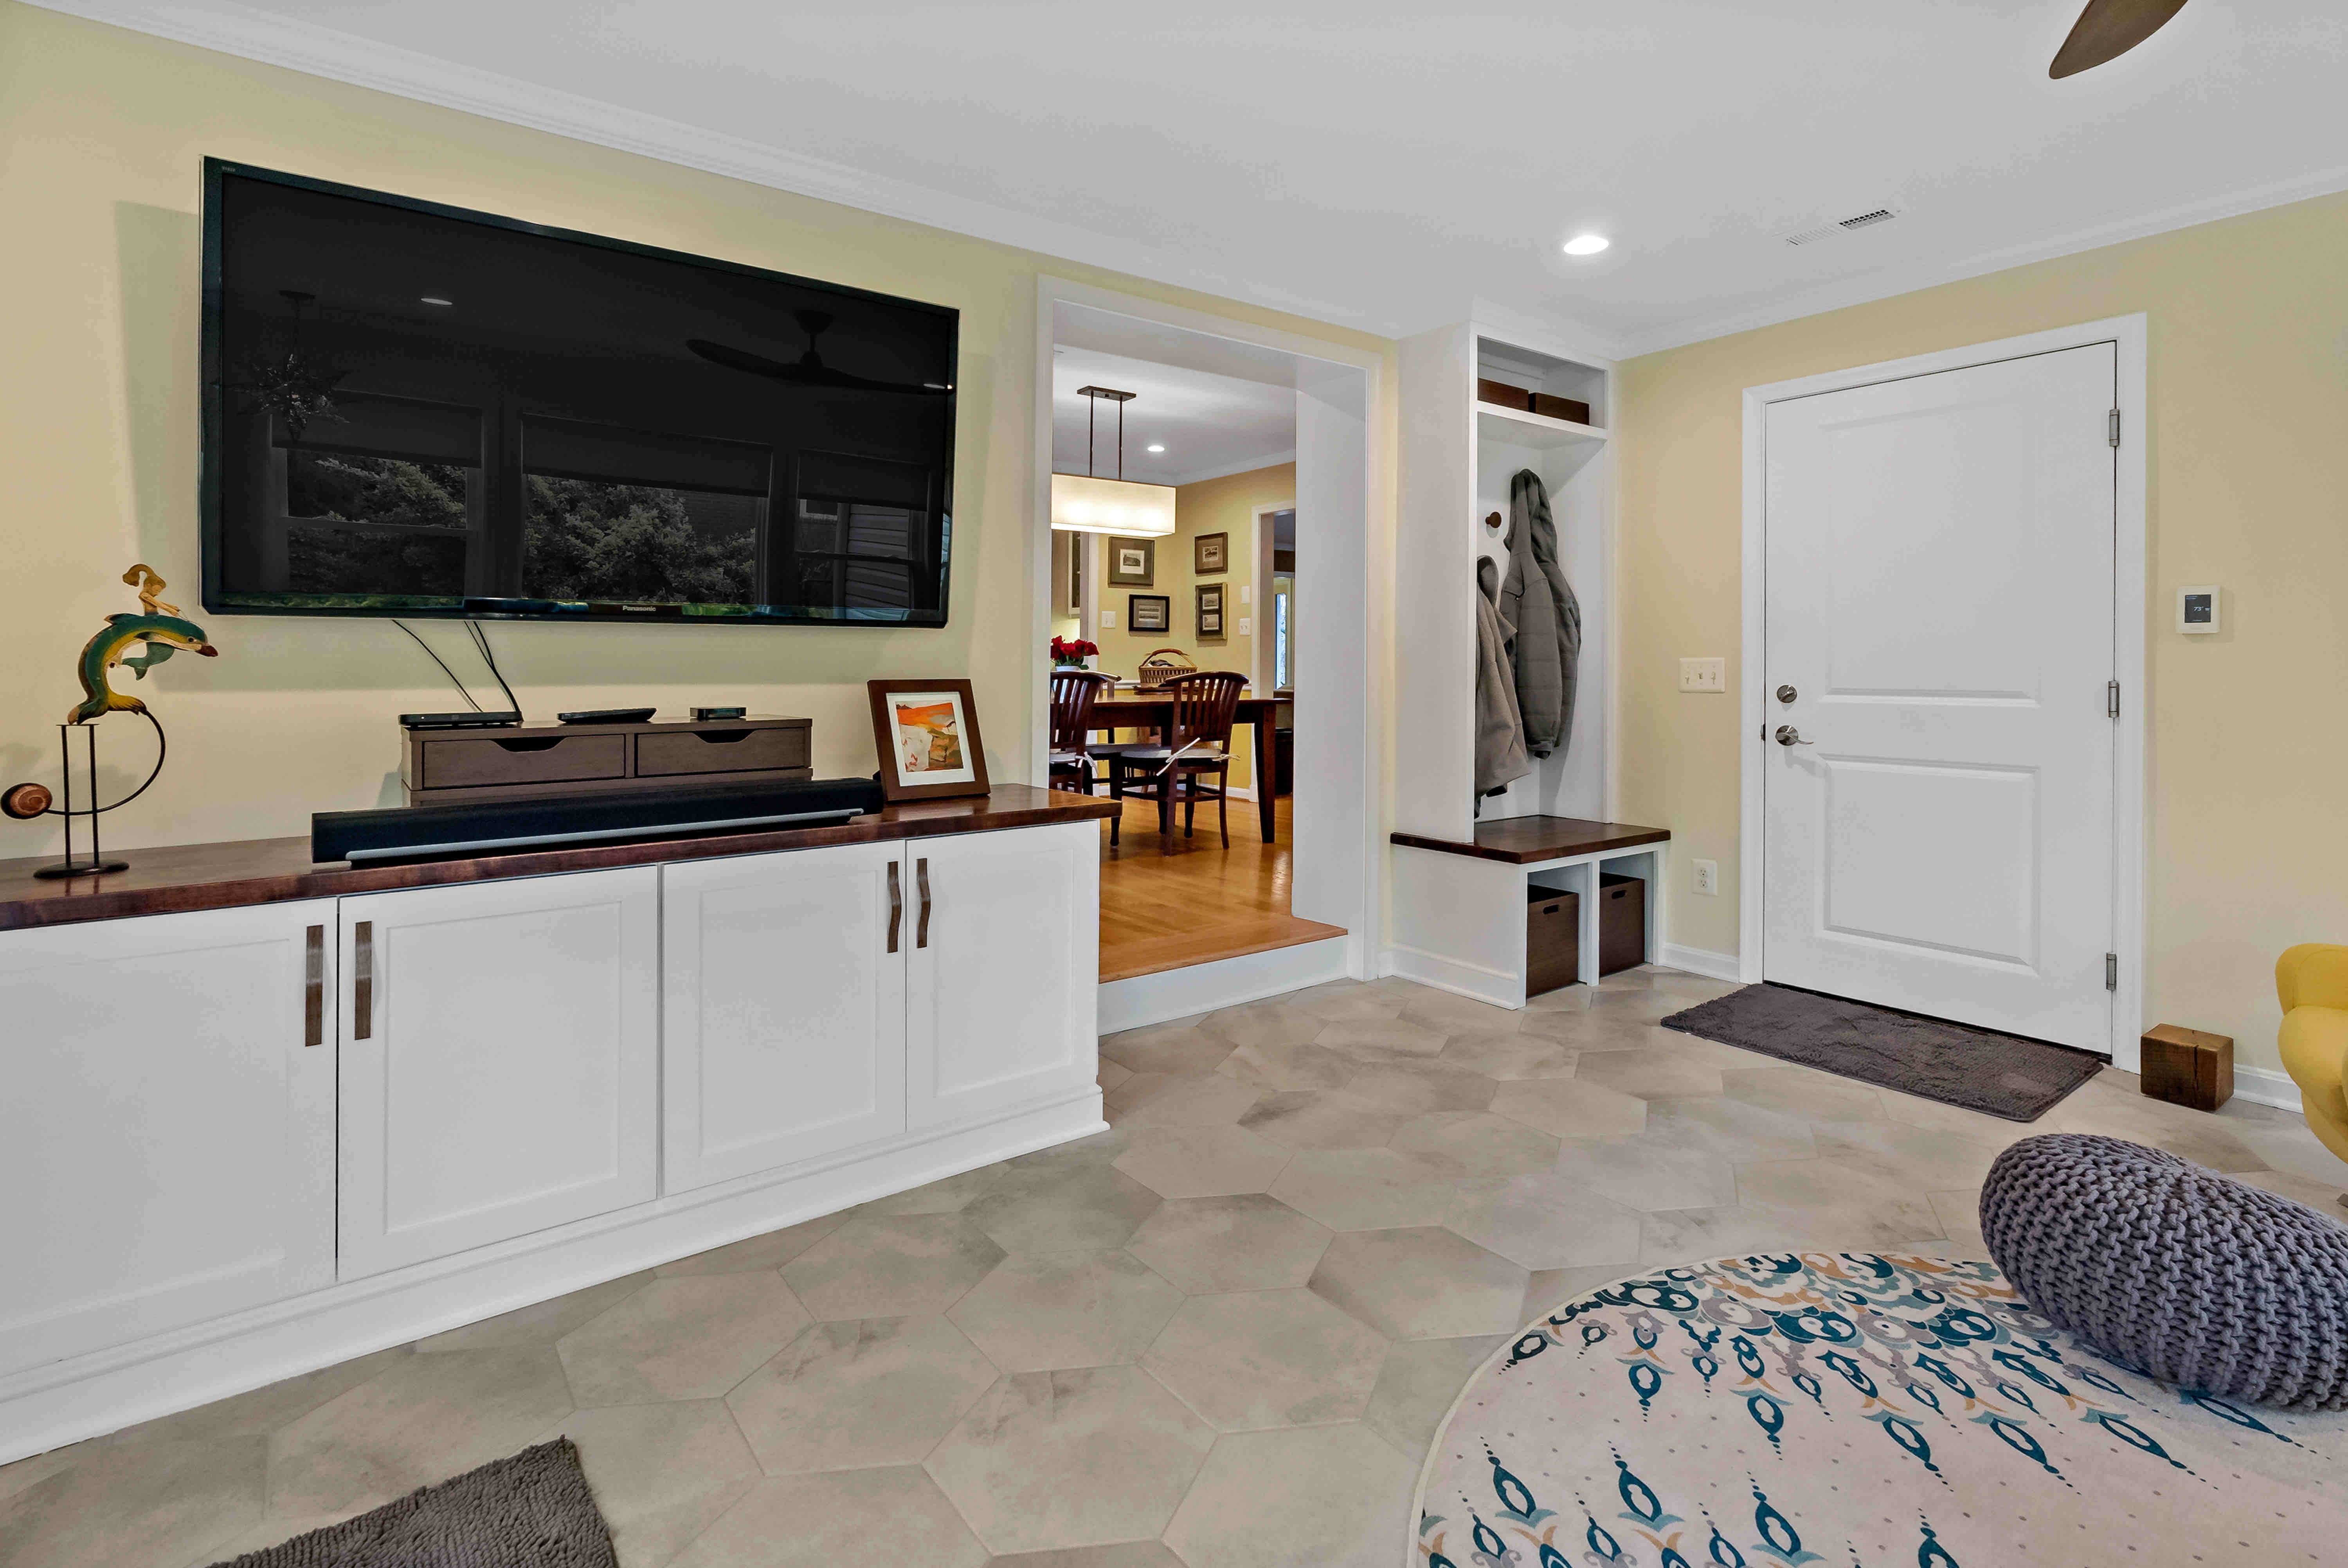 Carpeted TV room with white cabinets